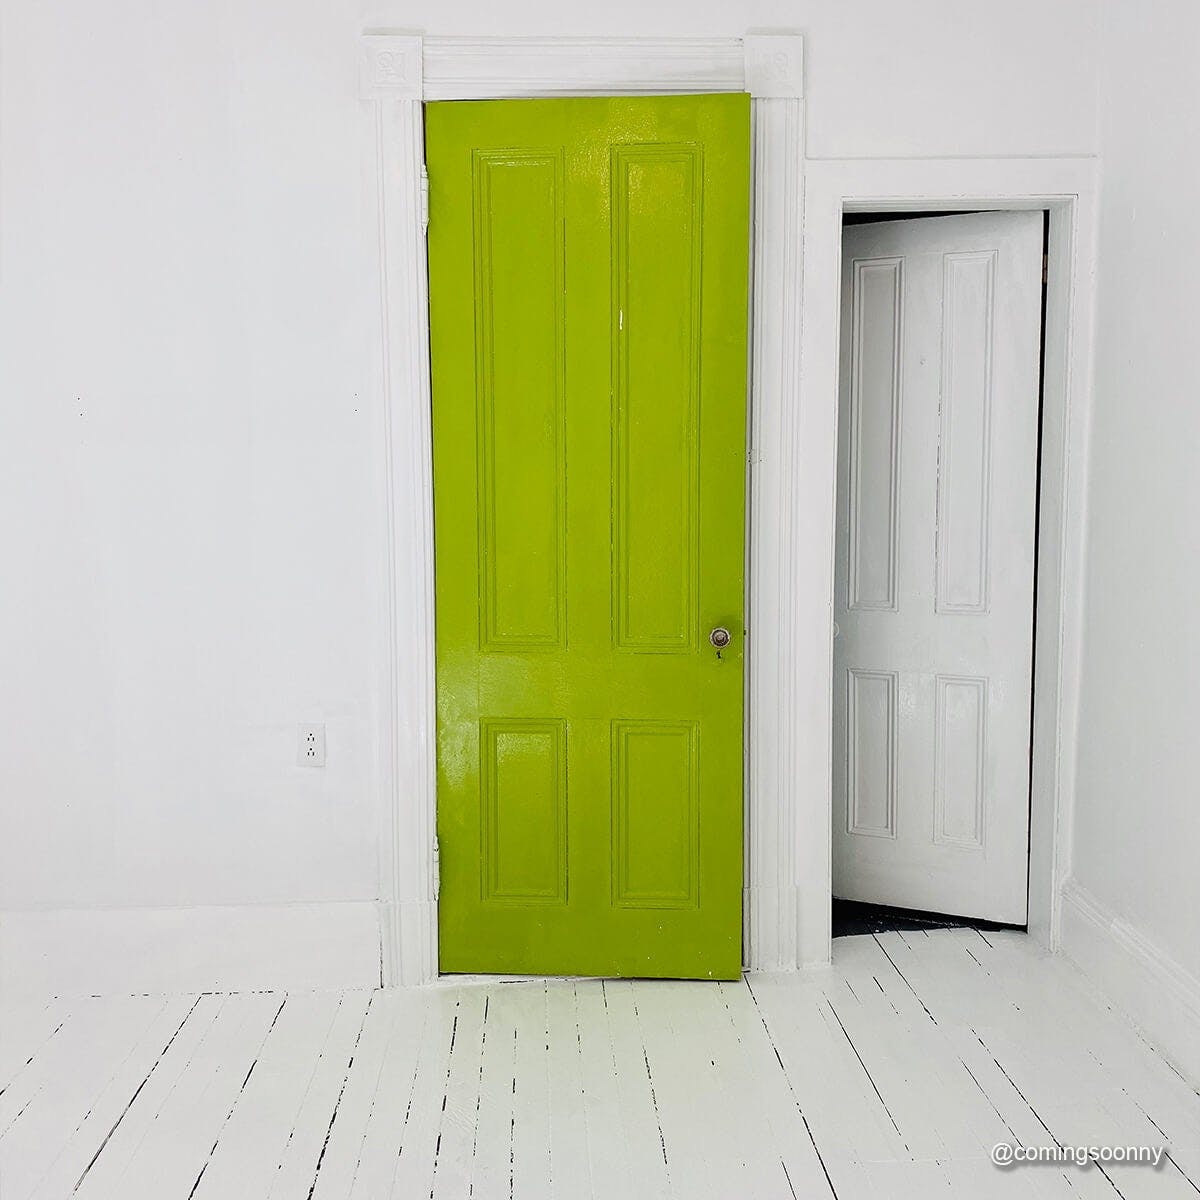 A door painted with PRETTY UGLY in an all-white room